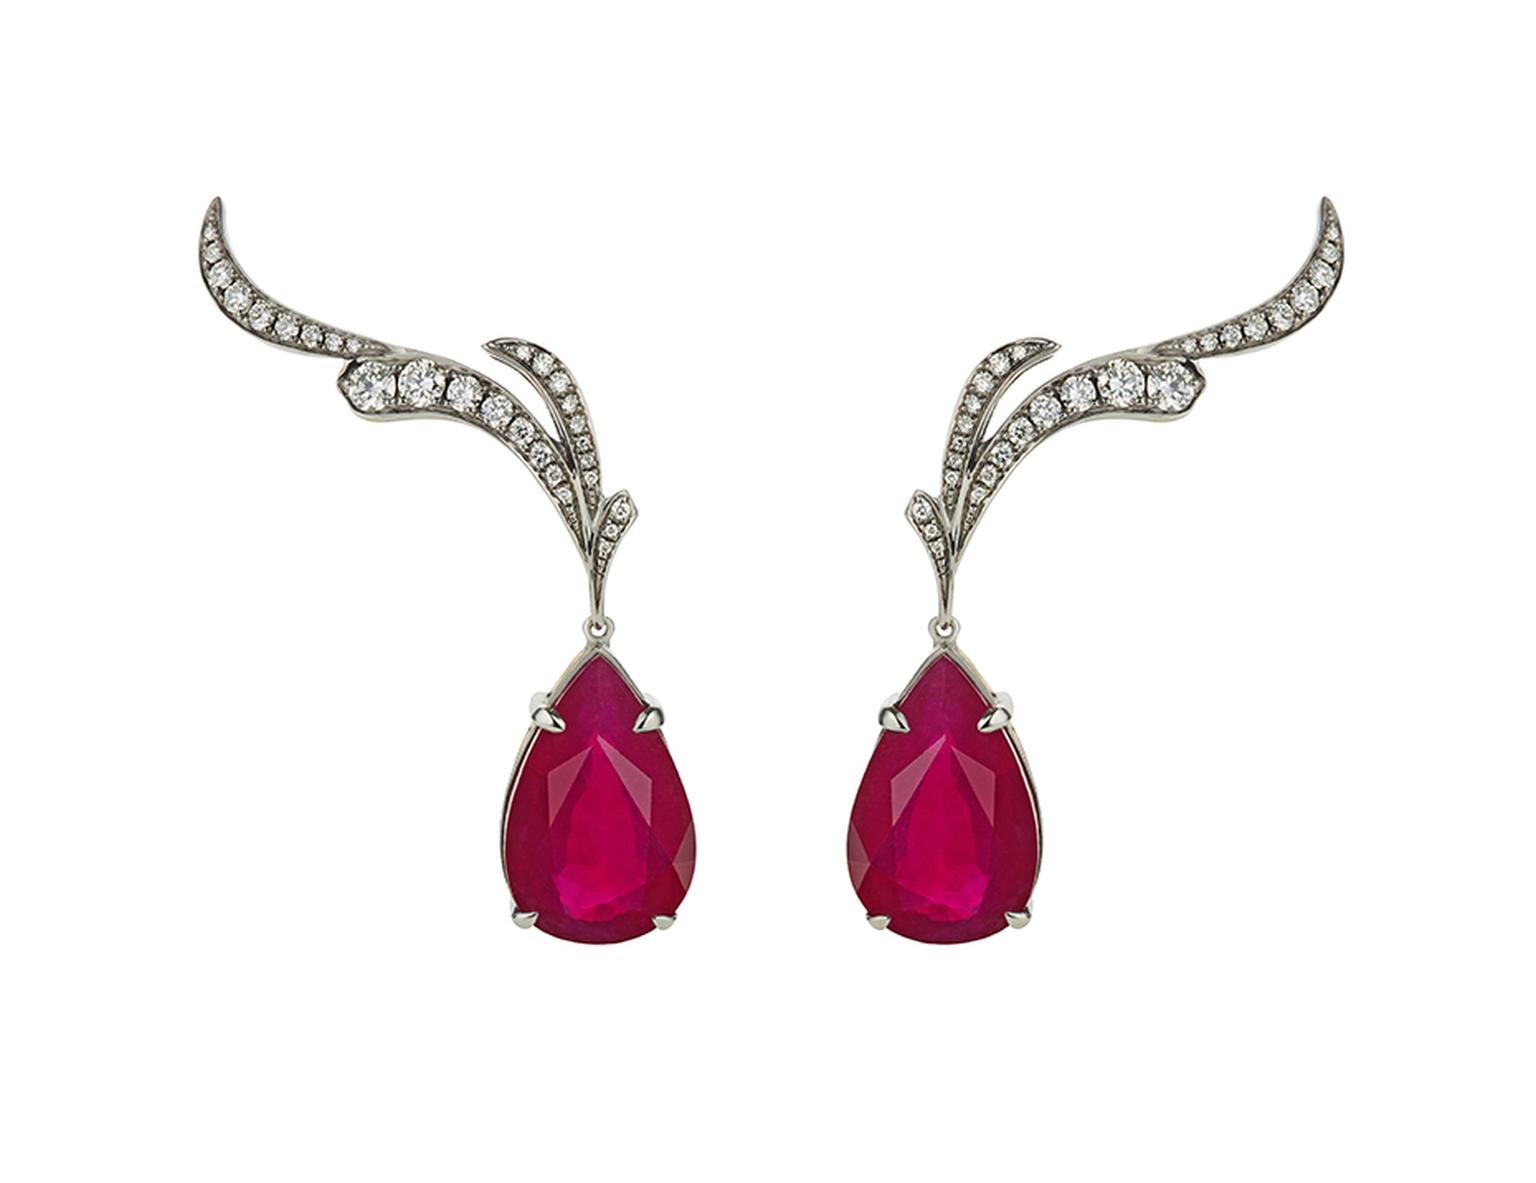 Nicholas Lieou Daedalus collection rubellite and diamond earrings.